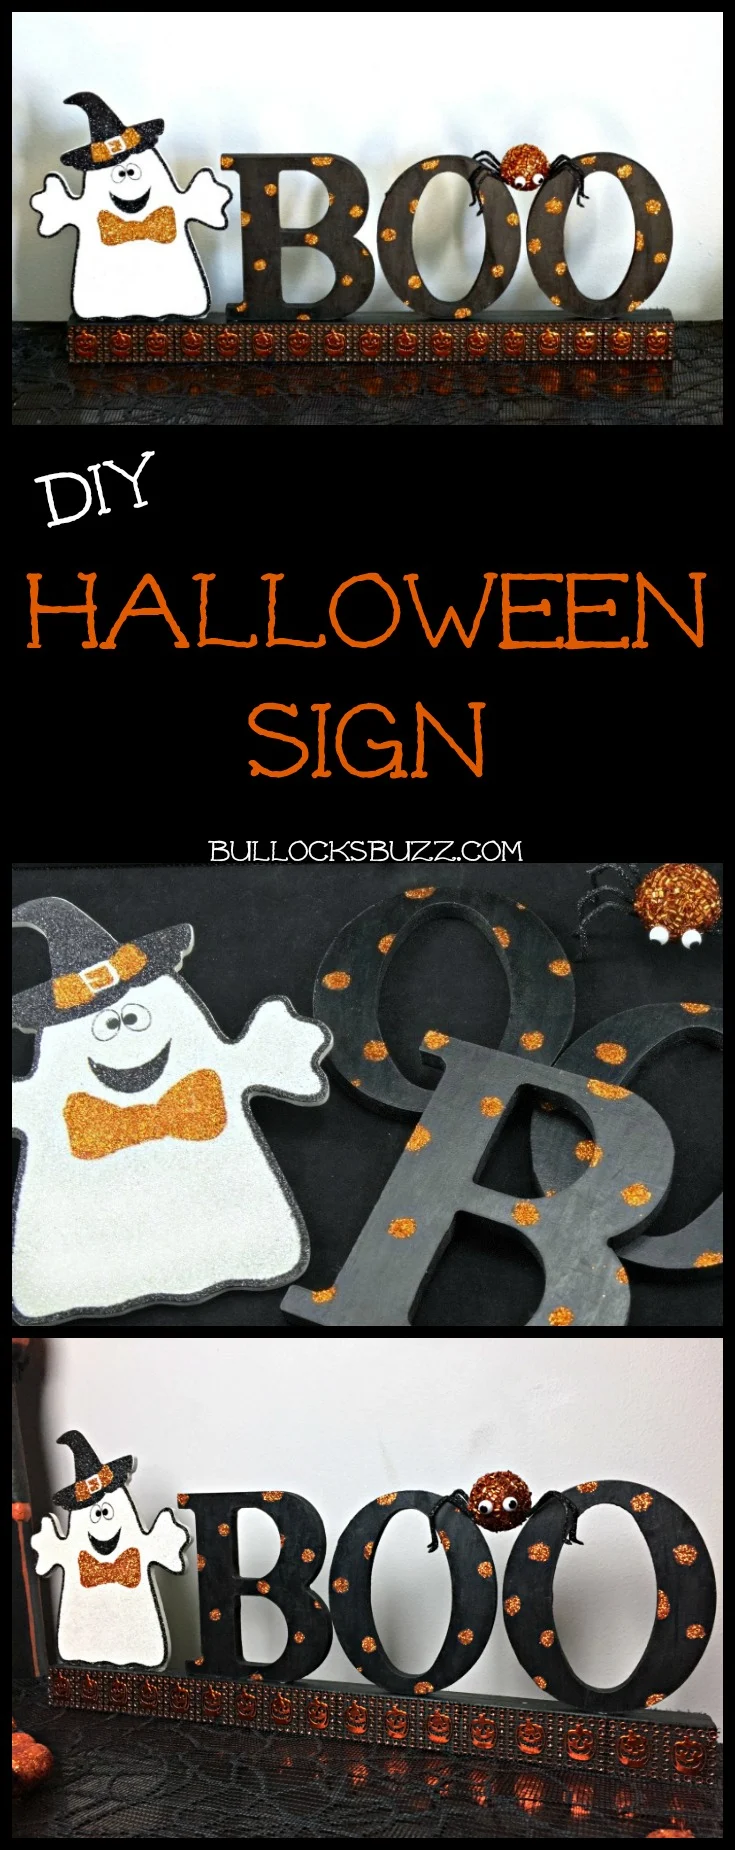 Spice up your spooky space with this frighteningly fun "BOO" DIY Halloween sign! Follow this simple tutorial to create your own faBOOlous Halloween decor!